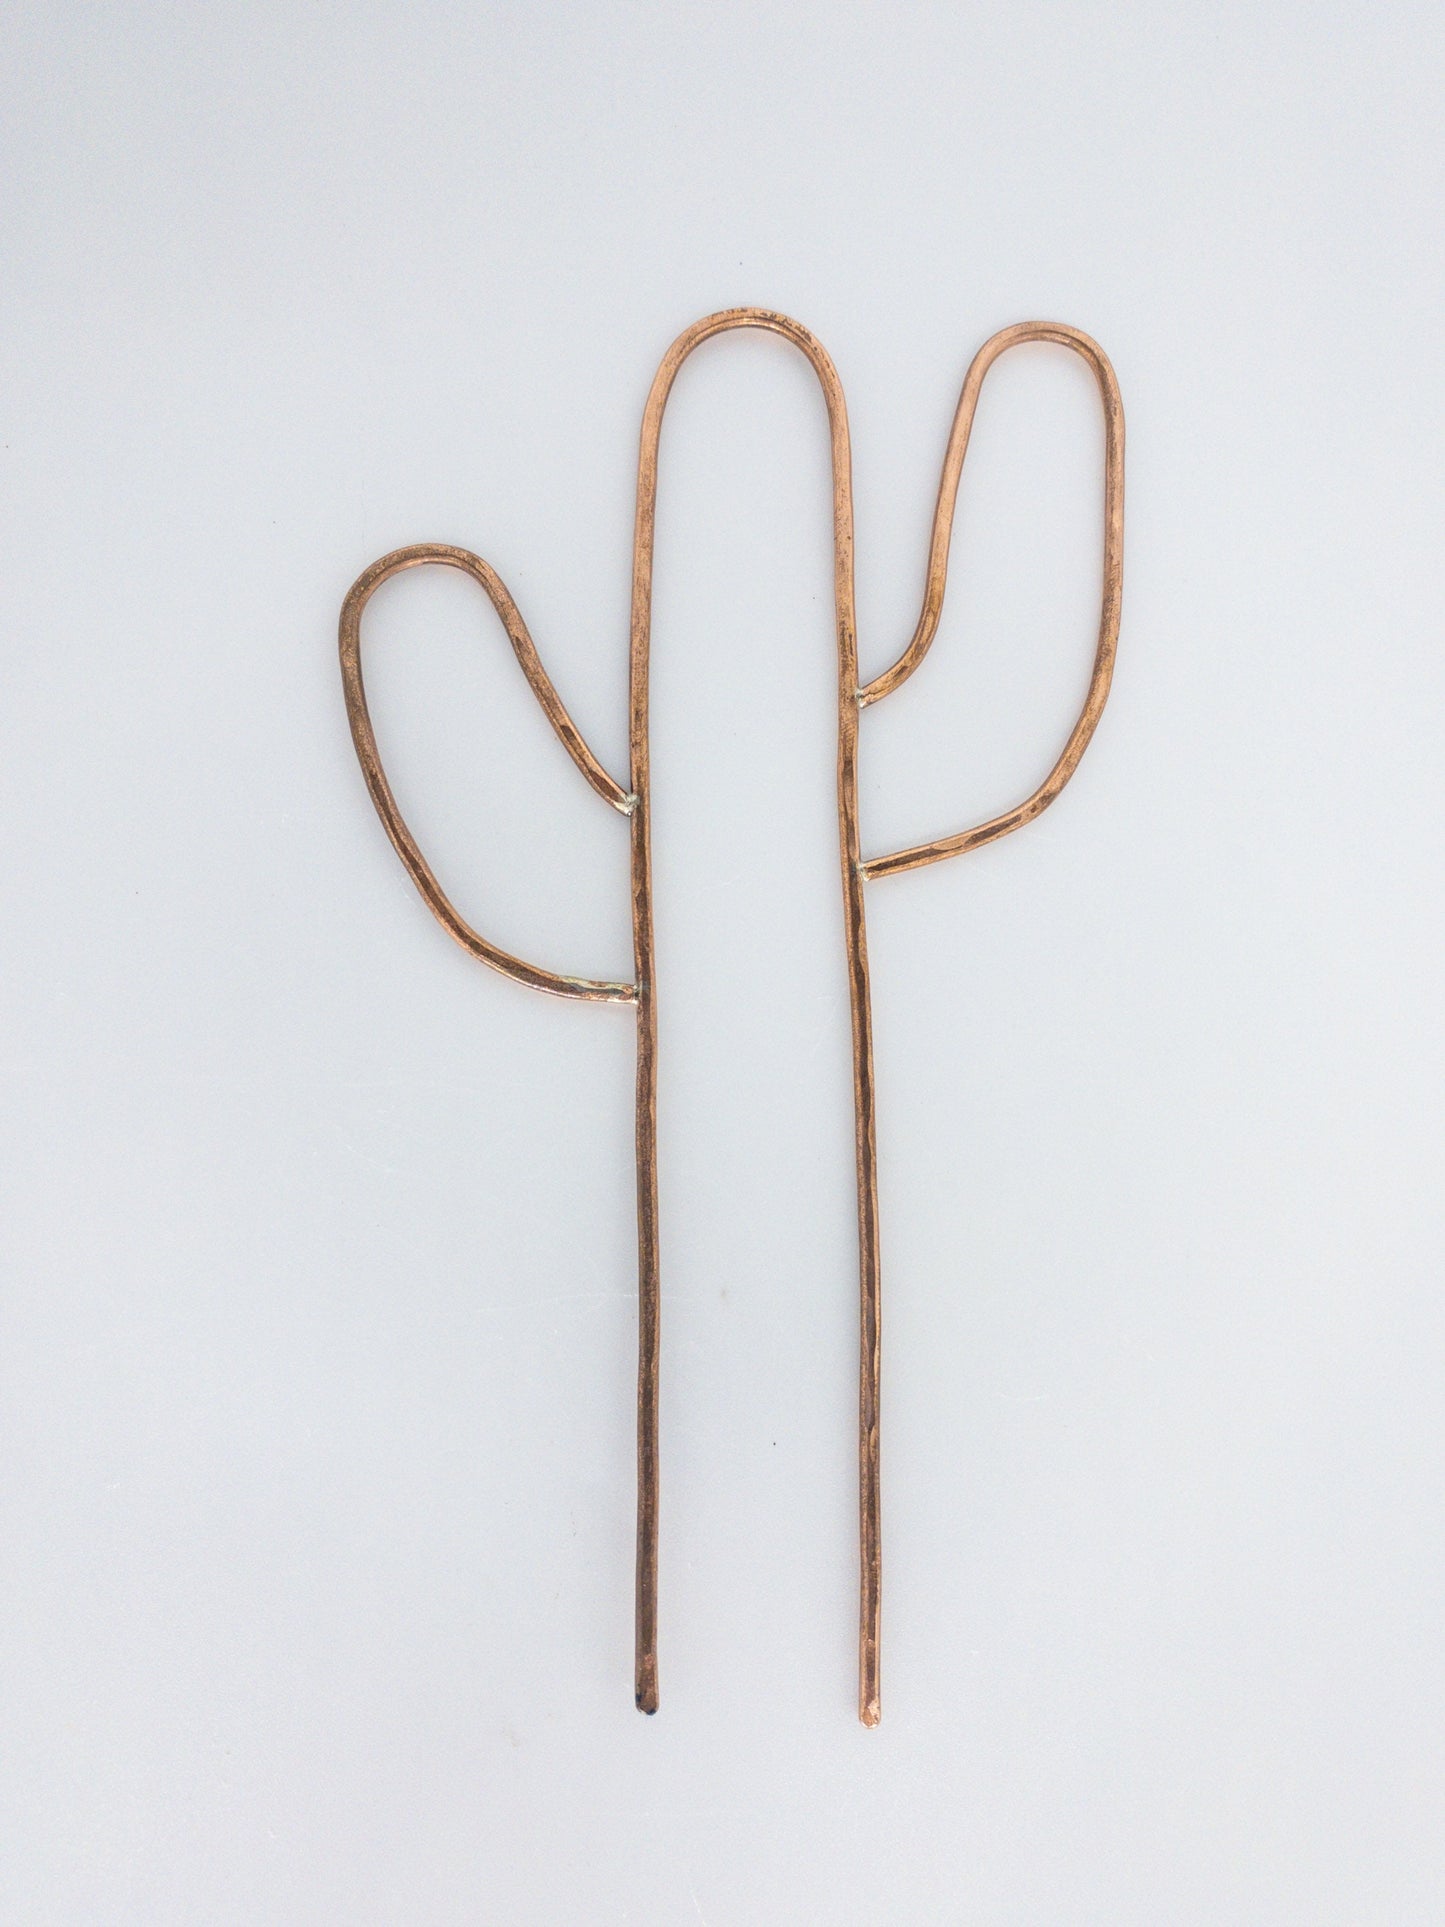 Copper Cactus Plant Stake, Indoor Plant Decor, Cactus Home Decor, Cactus Hairpin, Planter Box Decor, Pot Decor, Jewelry for Plants, Hairpin